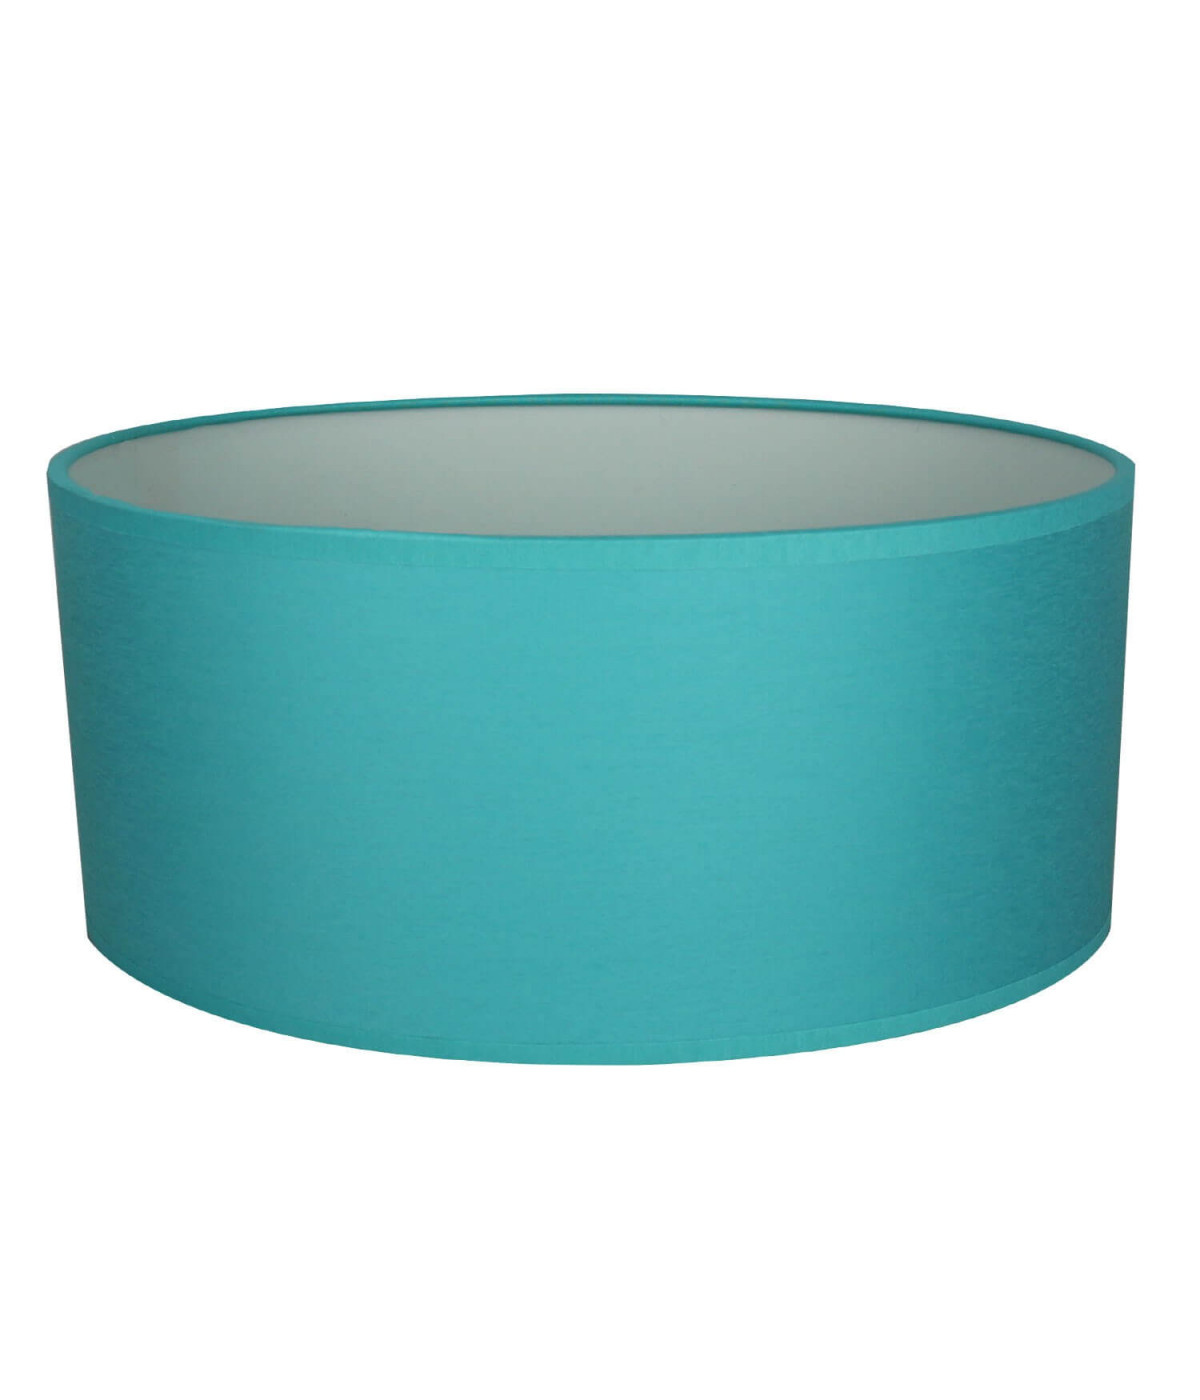 Oval shade Turquoise blue